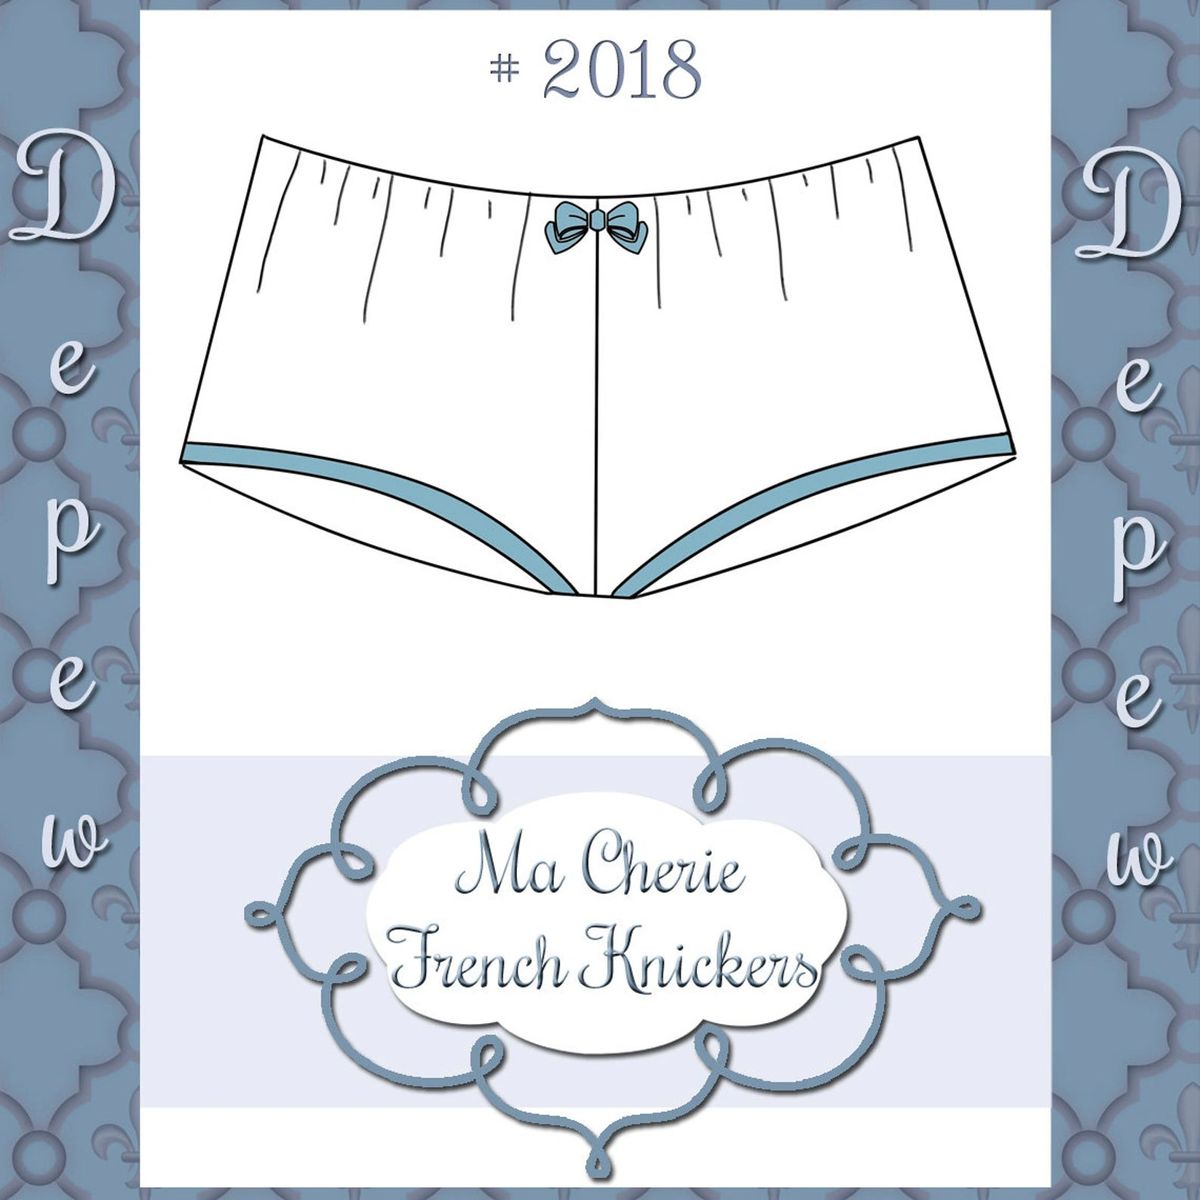 Lingerie Sewing Pattern Ladies' Ma Cherie French Knickers Depew 2018  Digital PDF Print at Home Pattern -INSTANT DOWNLOAD